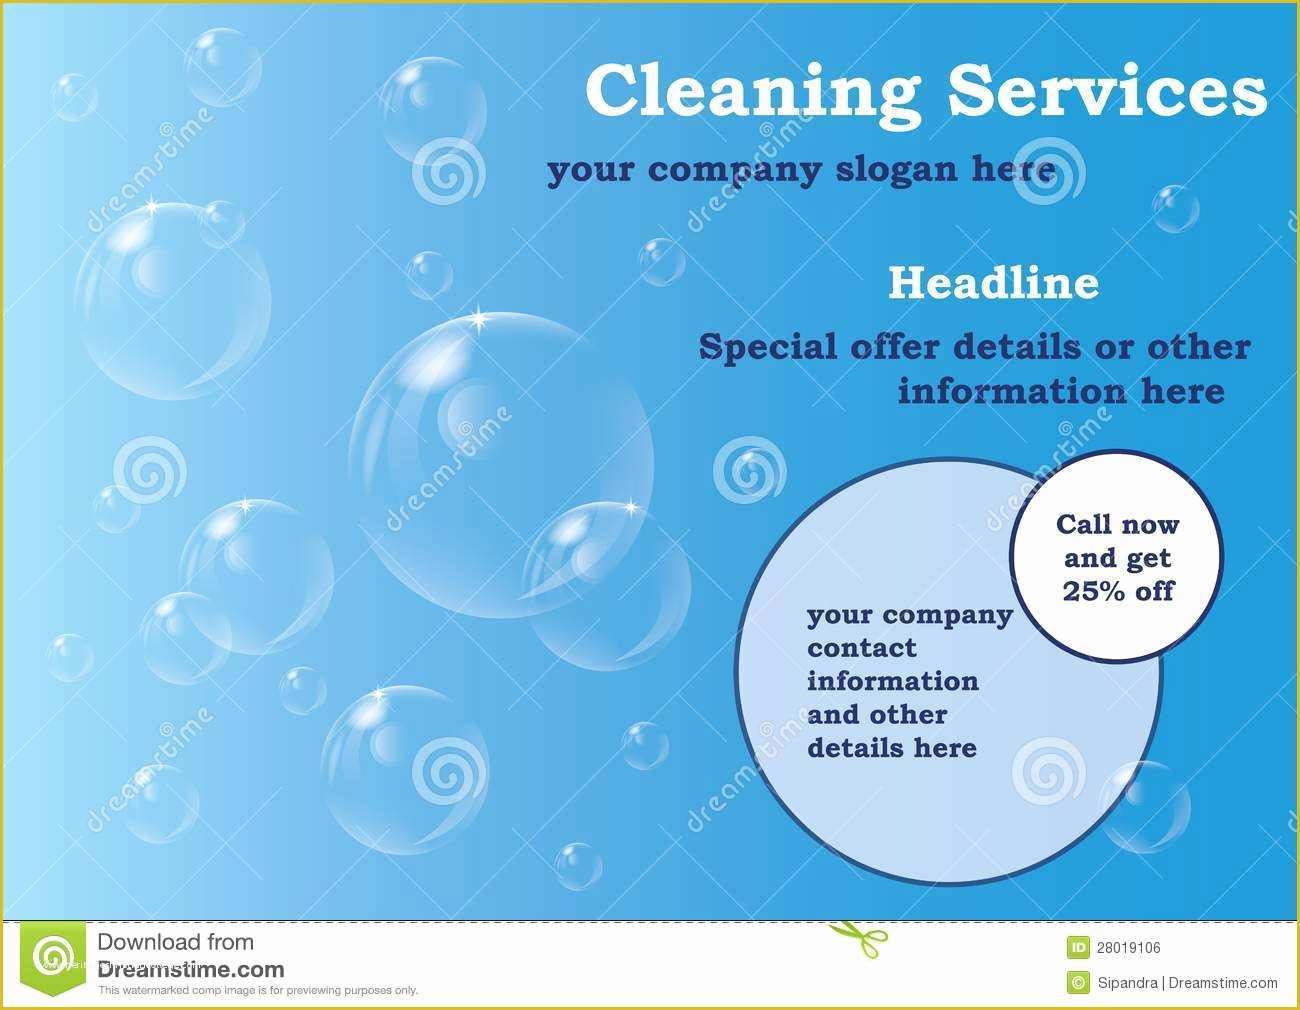 Cleaning Services Template Free Download Of Cleaning Services Flyers Templates Yourweek 0642ddeca25e